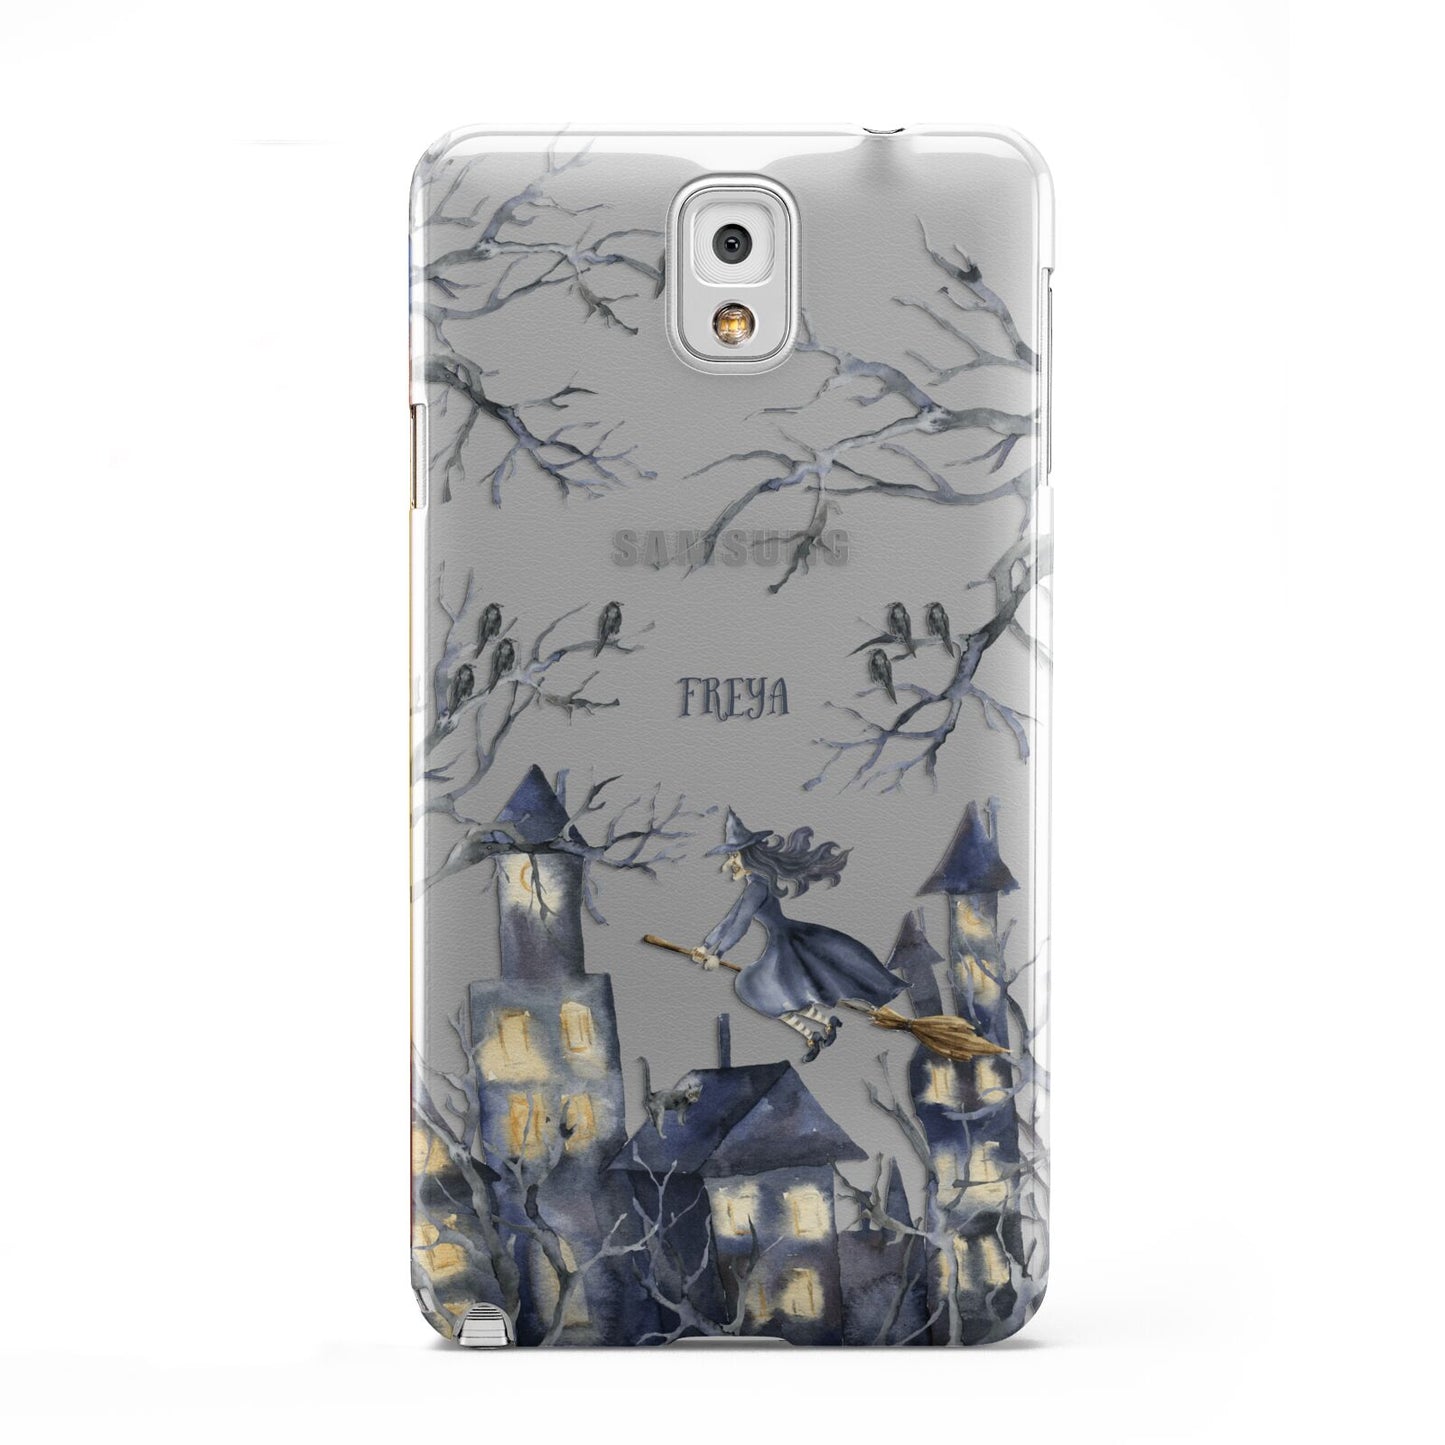 Treetop Halloween Witch Samsung Galaxy Note 3 Case